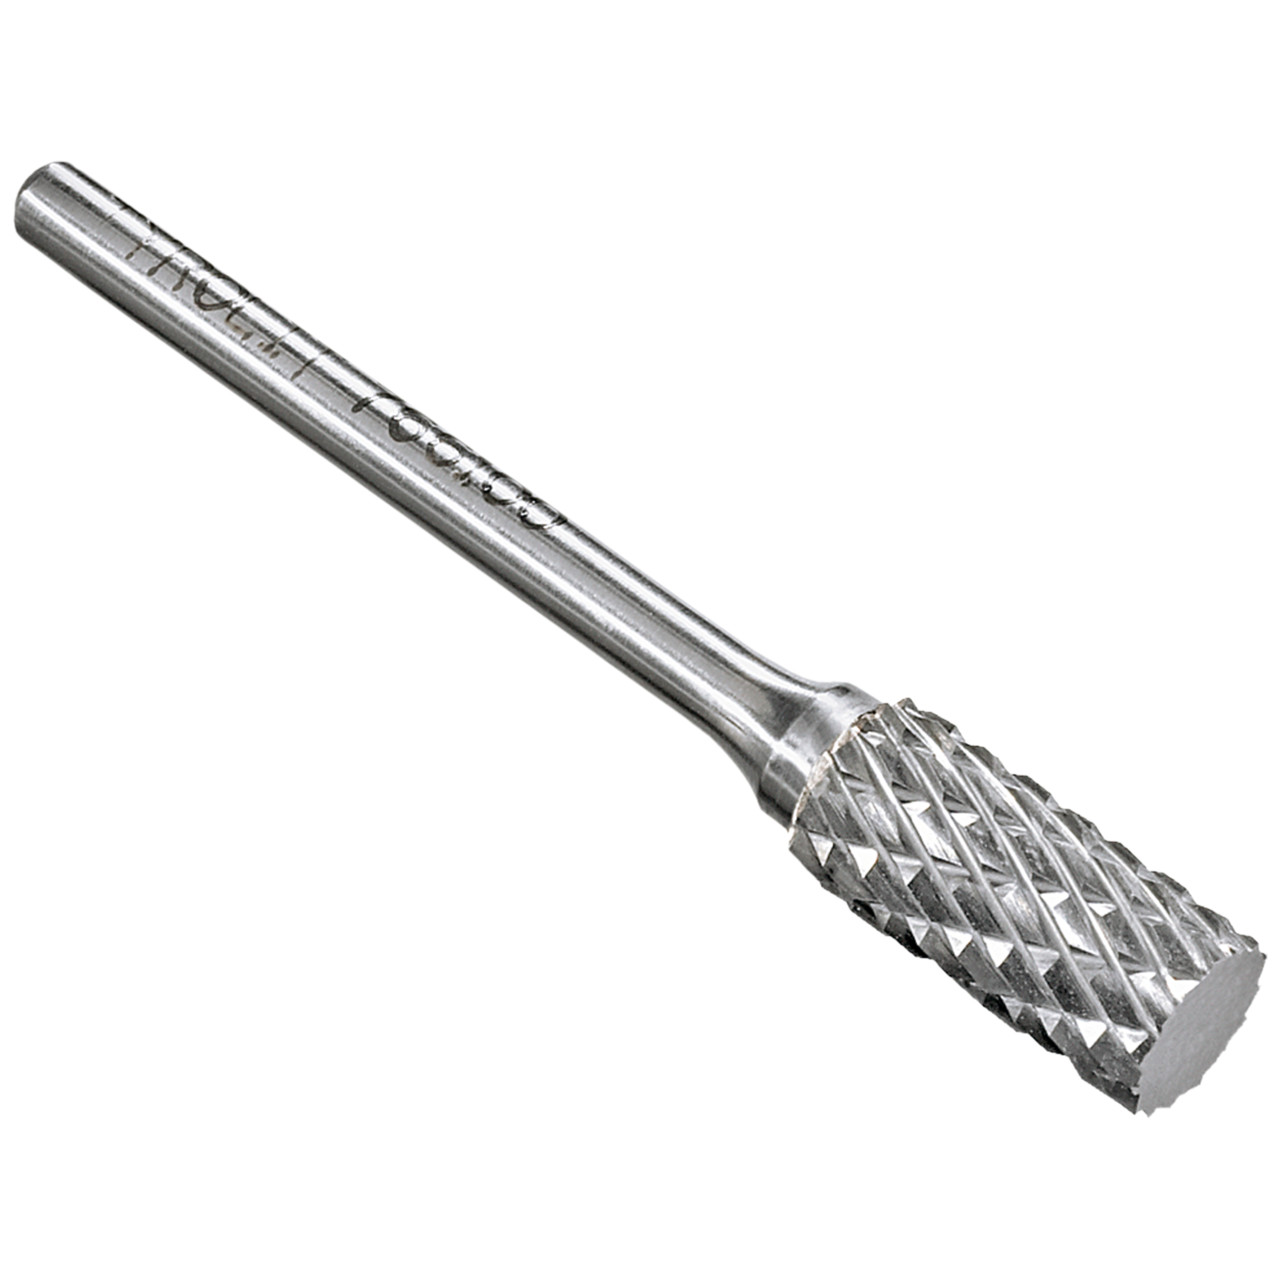 TYROLIT carbide end mill DxT-SxL 6x13-3x45 For cast iron, steel and stainless steel, shape: 52ZYA - cylinder, Art. 766100